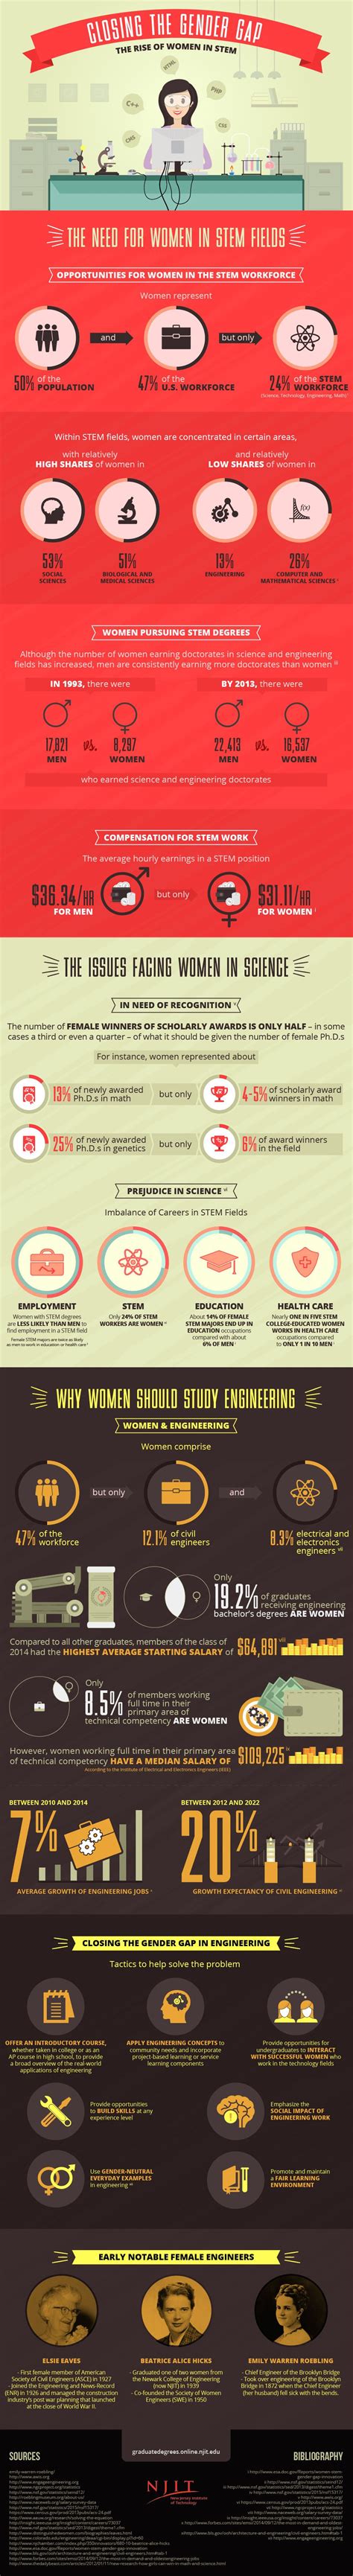 Closing The Gender Gap Infographic Visualistan